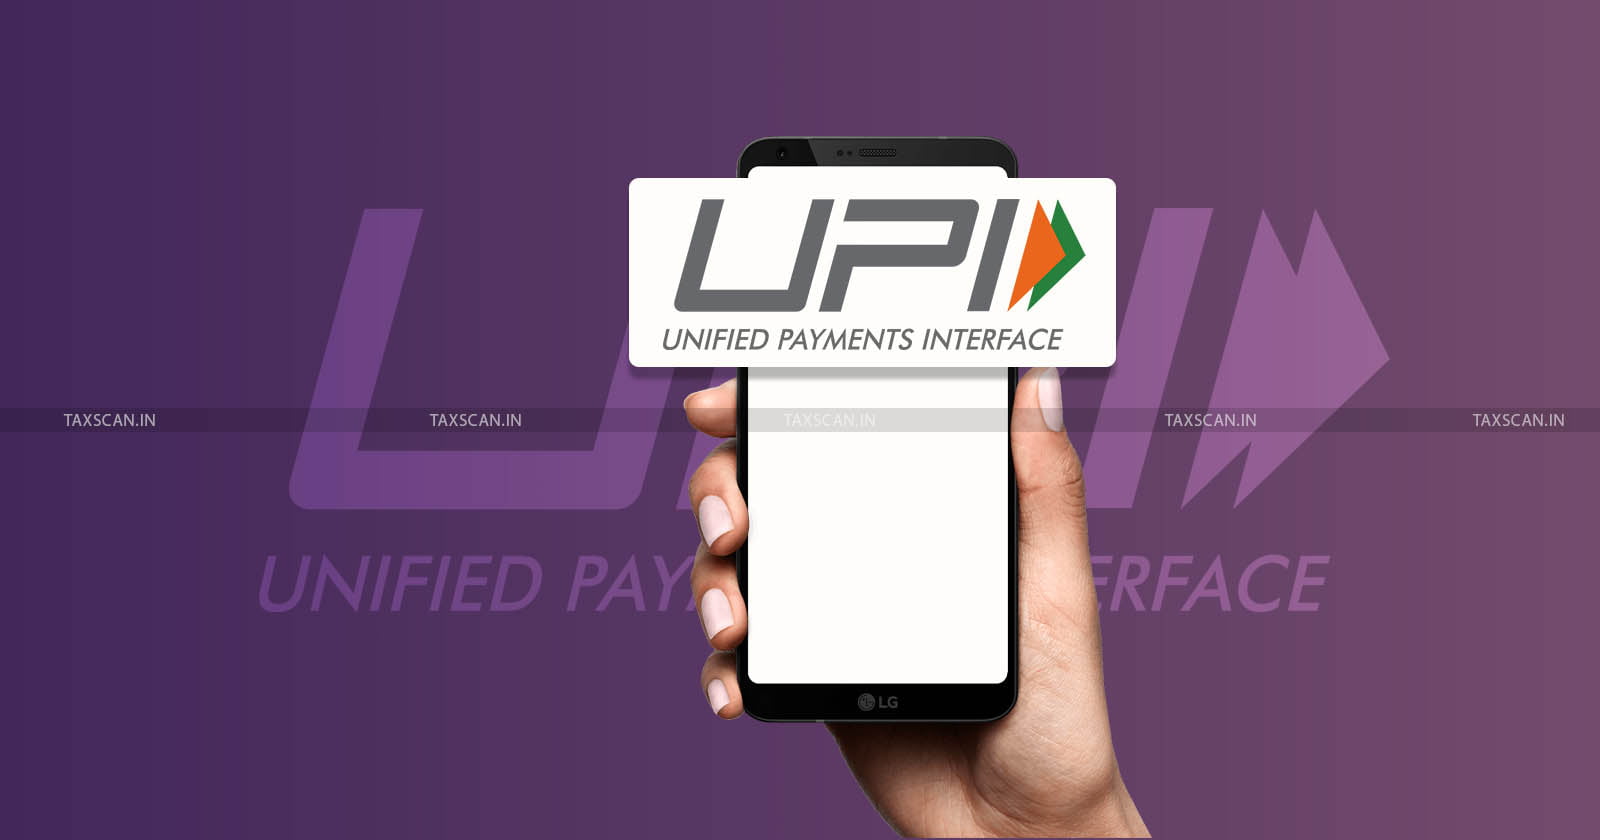 UPI - Fast Payment Systems - Cross-Border Payments - Central Minister Pankaj Chaudhary - Pankaj Chaudhary - Unified Payments Interface - TAXSCAN